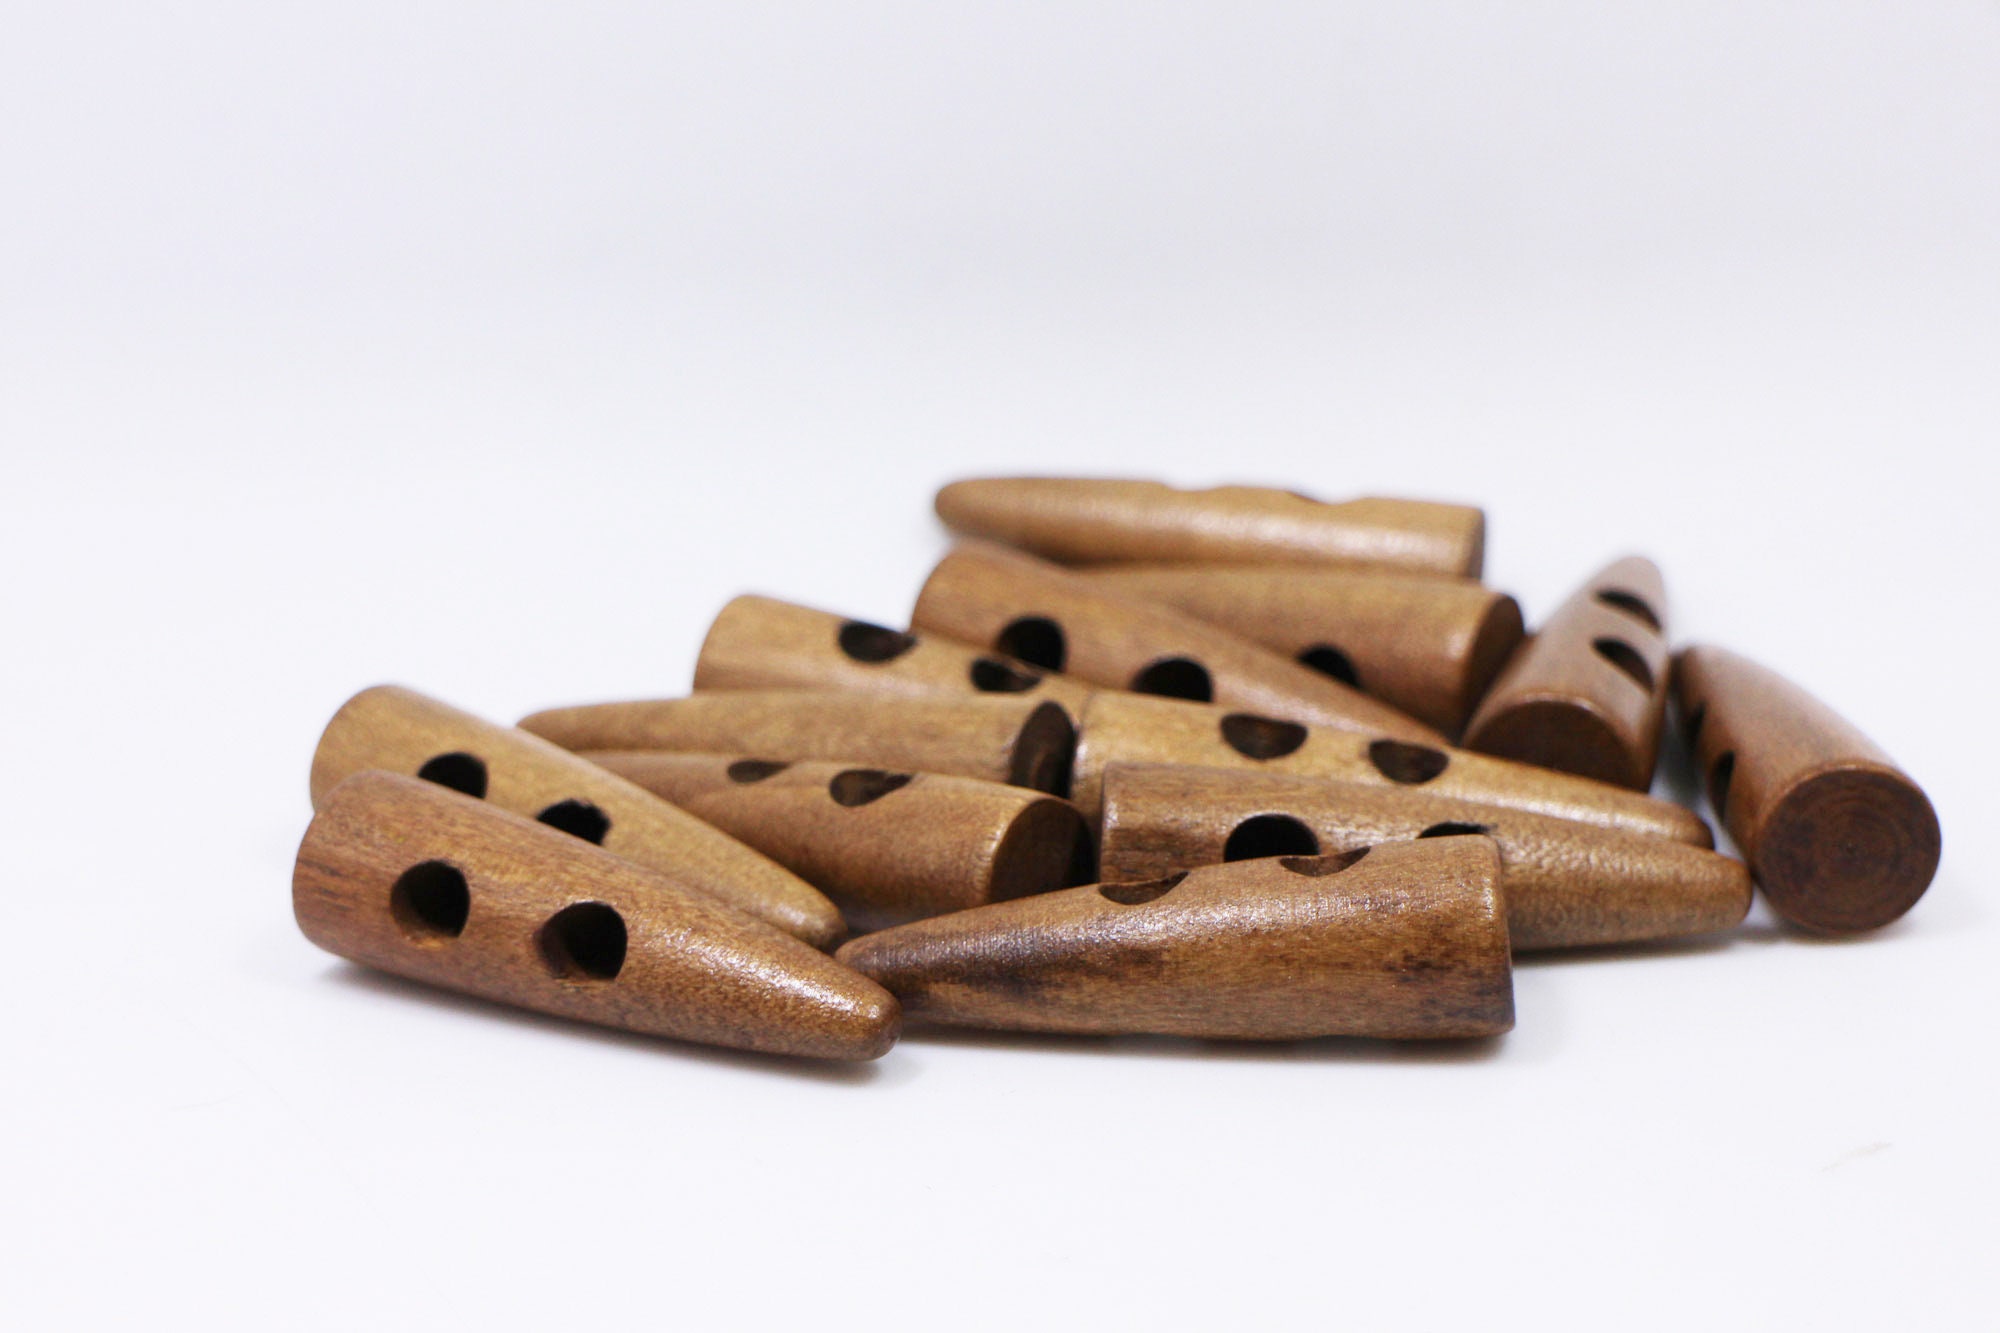  GLOGLOW 50Pcs Wood Toggle Buttons, Wood Sewing Horn Toggle  Buttons 2 Holes Wood Buttons Dark Coffee Wood Button DIY Coat Clothes  Decoration